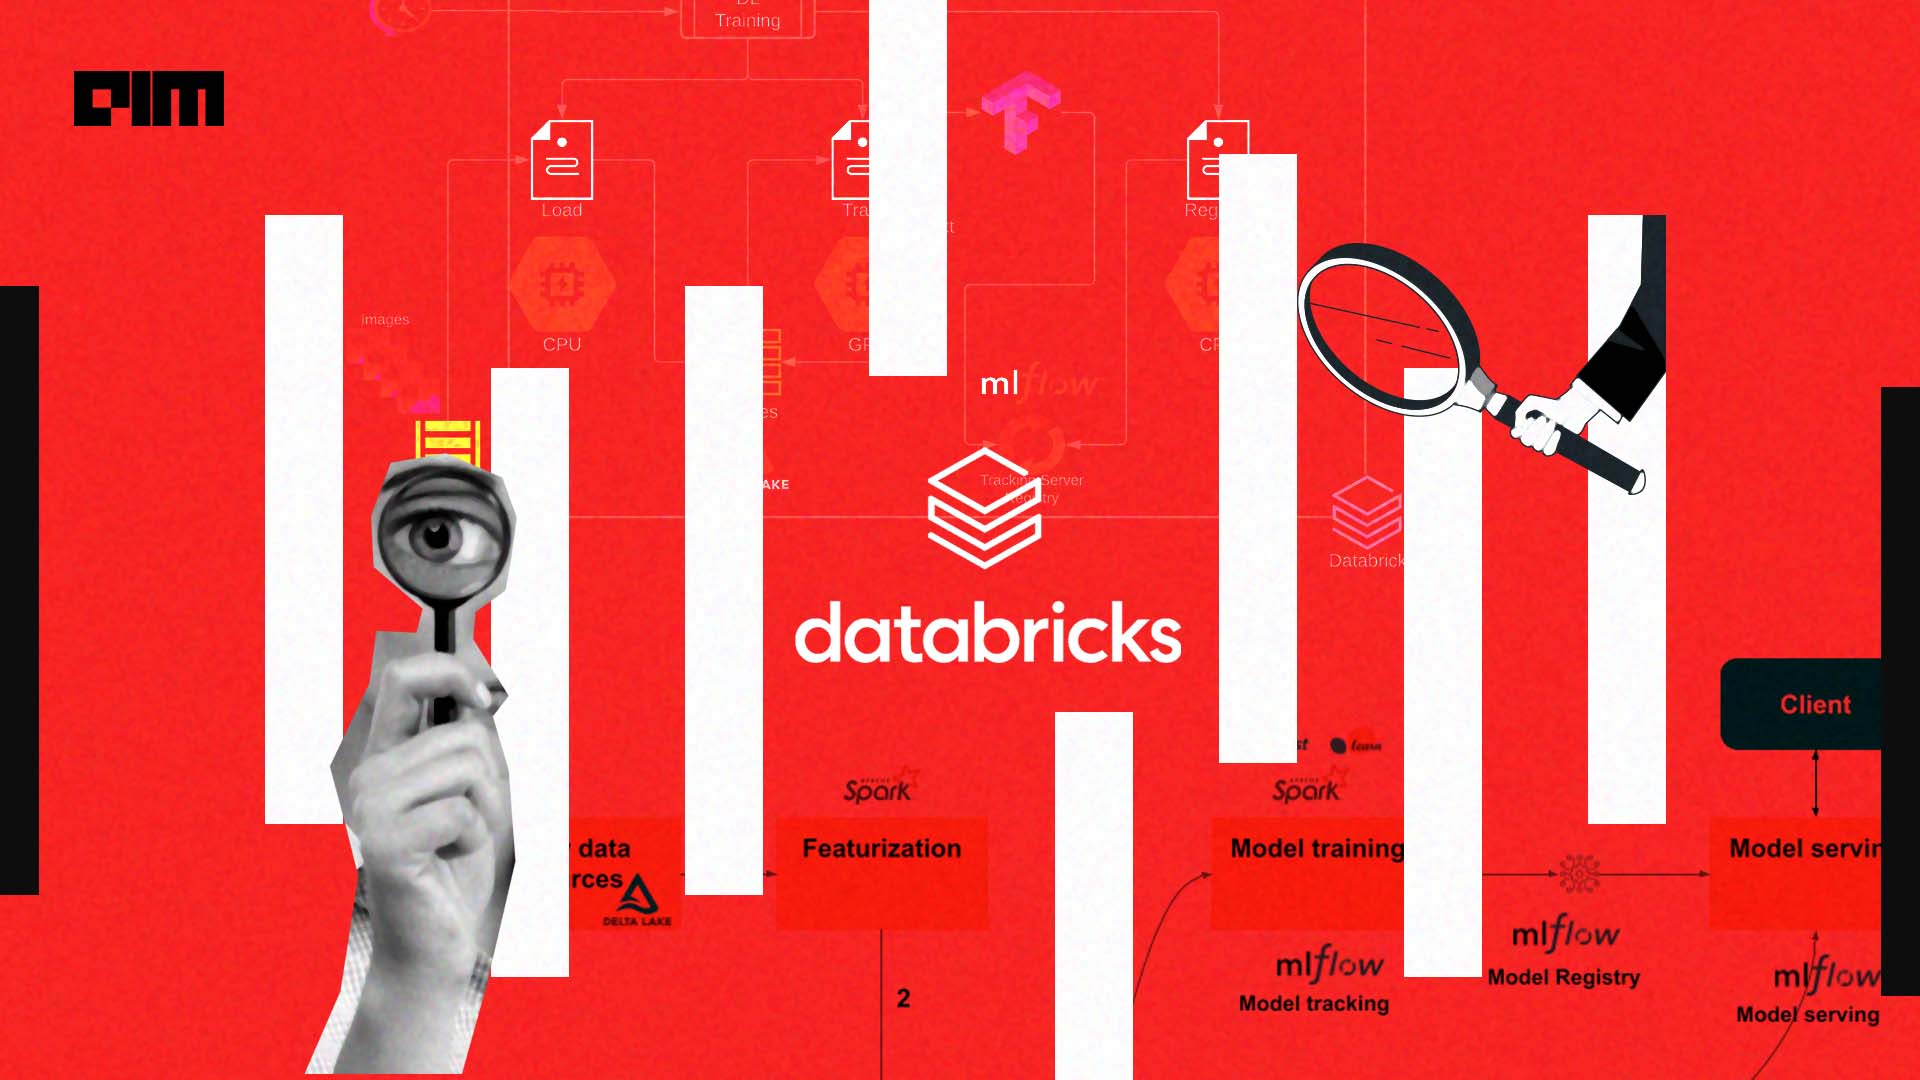 Databricks Launches AI/BI: A Compound AI System for Intelligent Business Insights [Video]